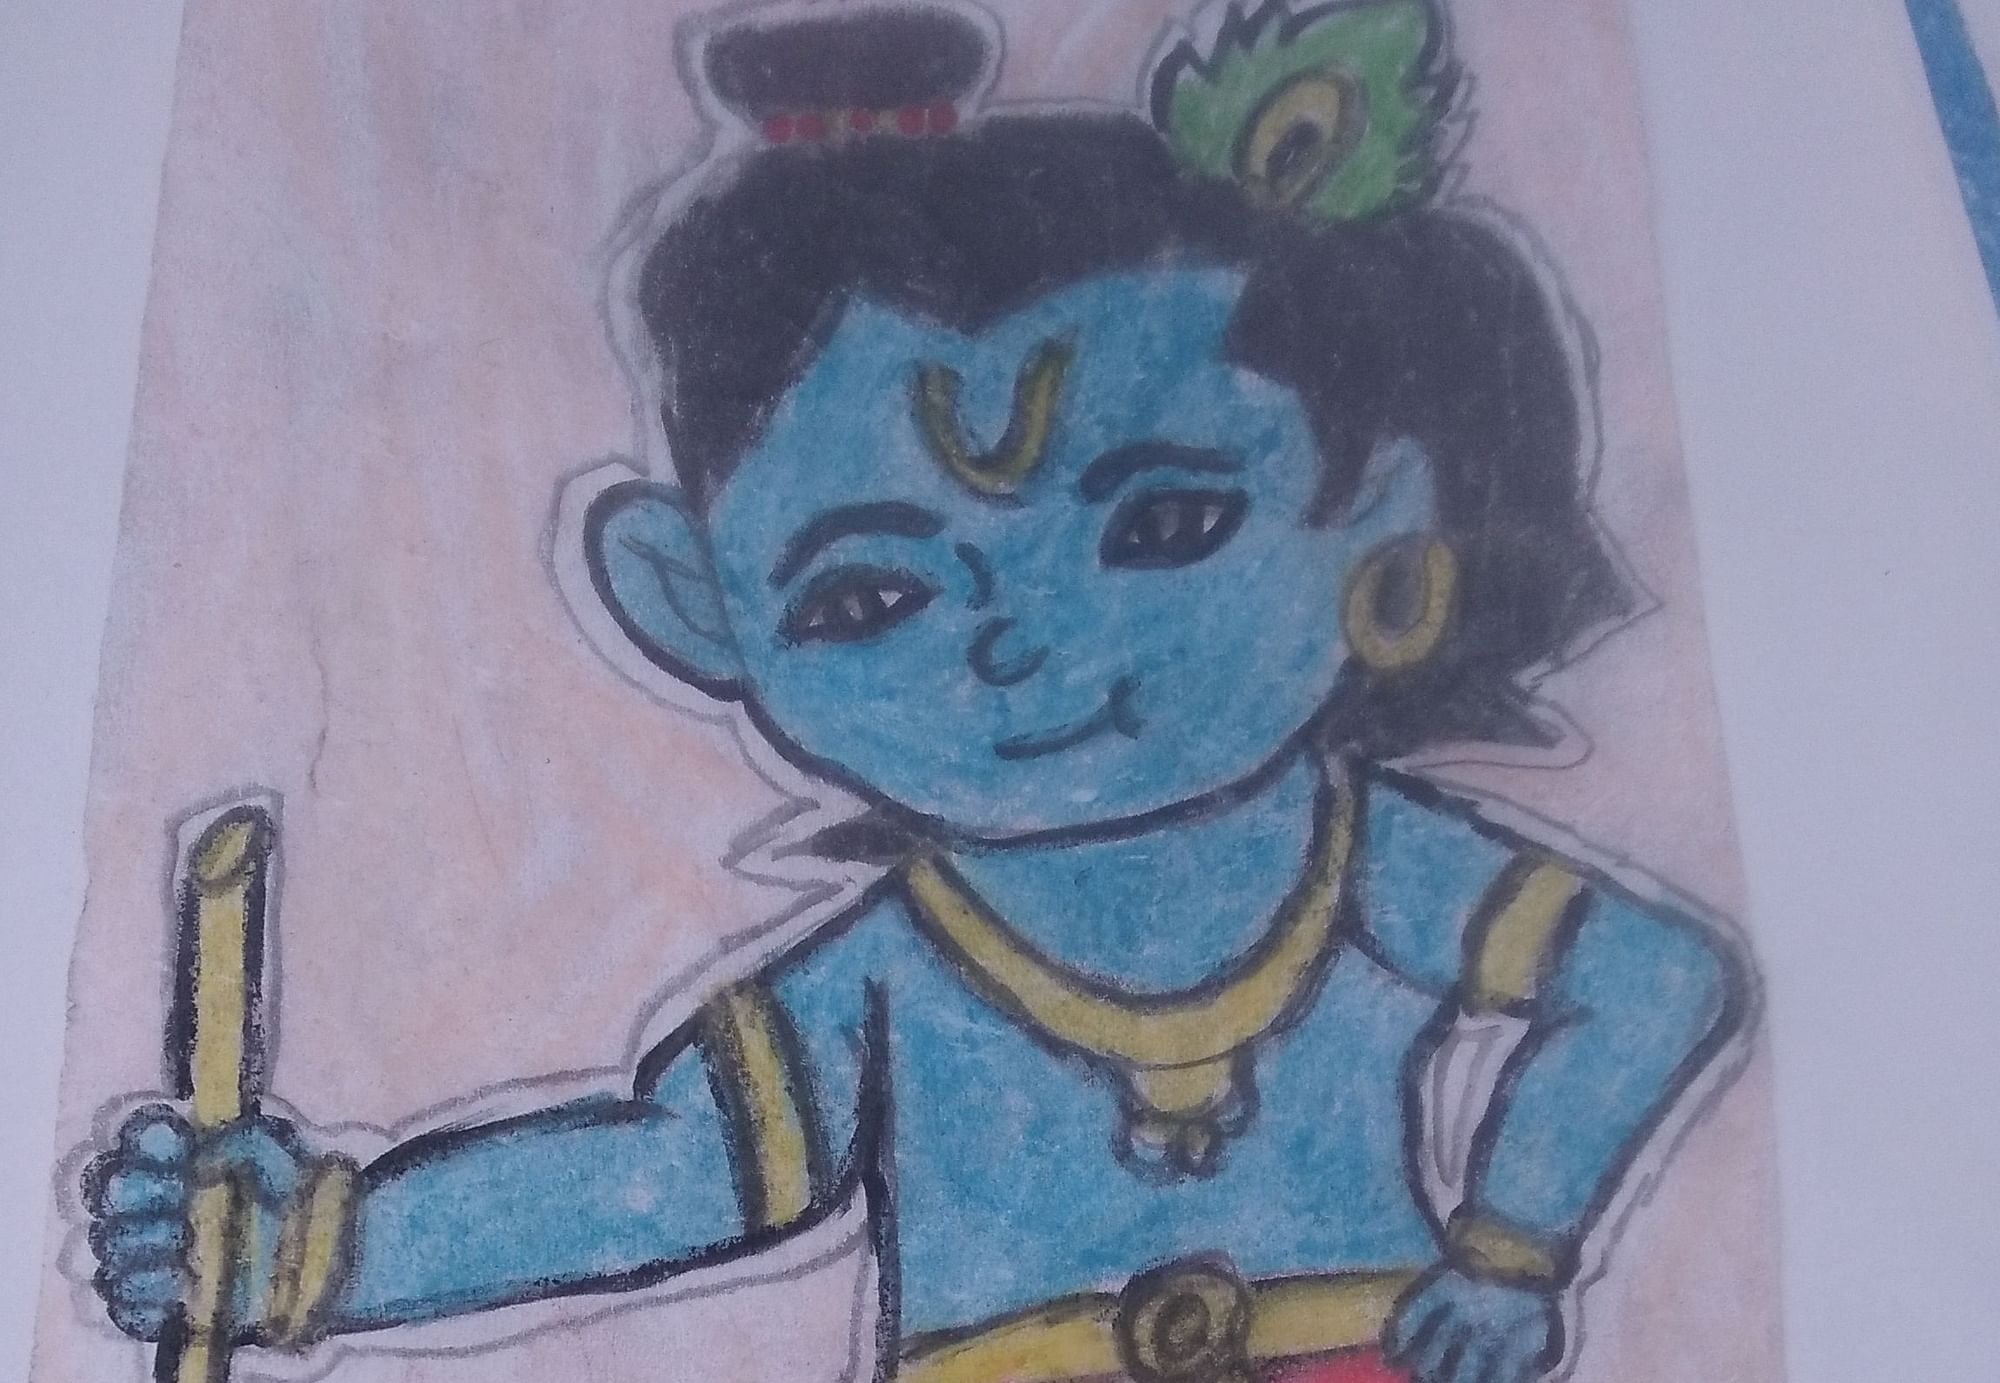 How to draw a beautiful painting of cute little Krishna/ krishna drawing &  painting step by step - YouTube